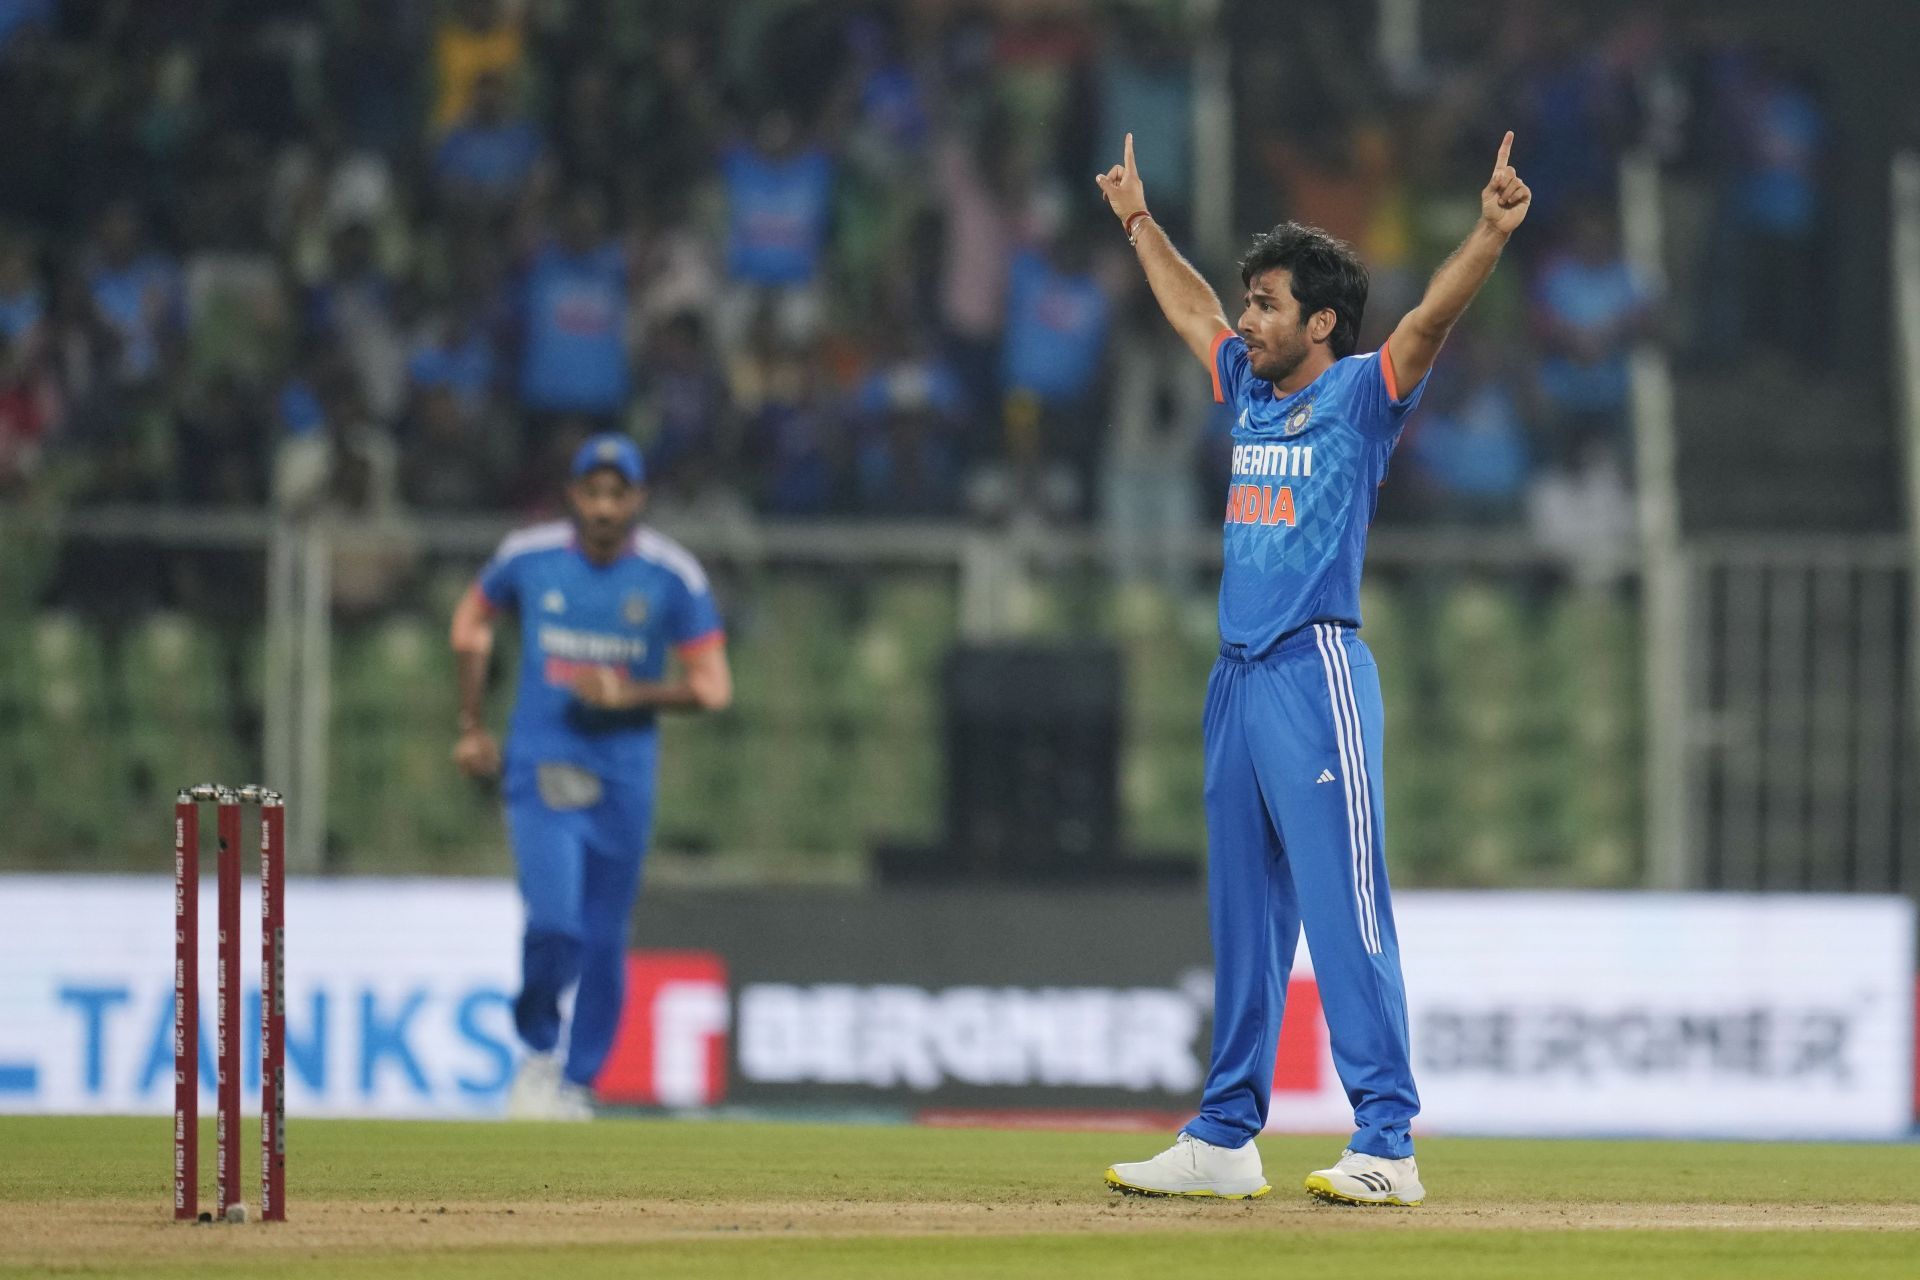 Ravi Bishnoi picked up crucial wickets in the powerplay overs. [P/C: AP]